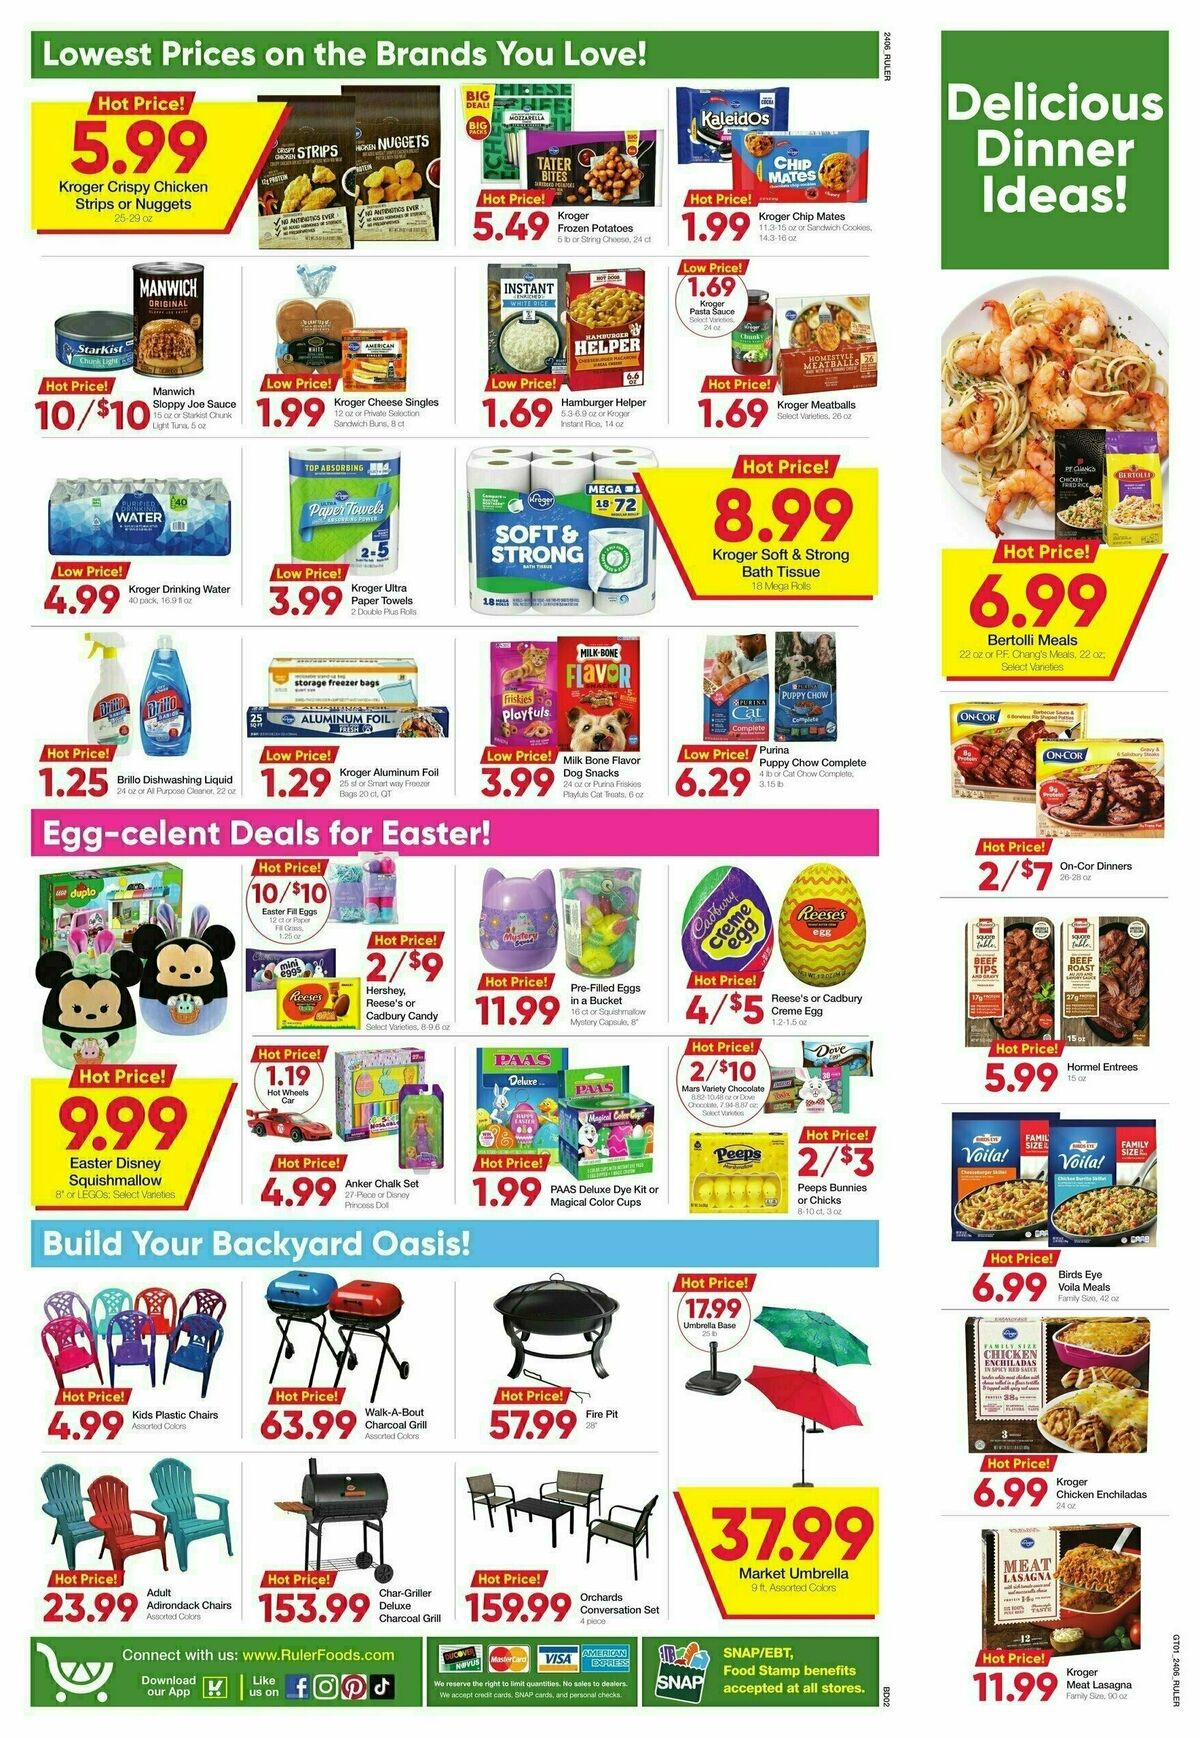 Ruler Foods Weekly Ad from March 13